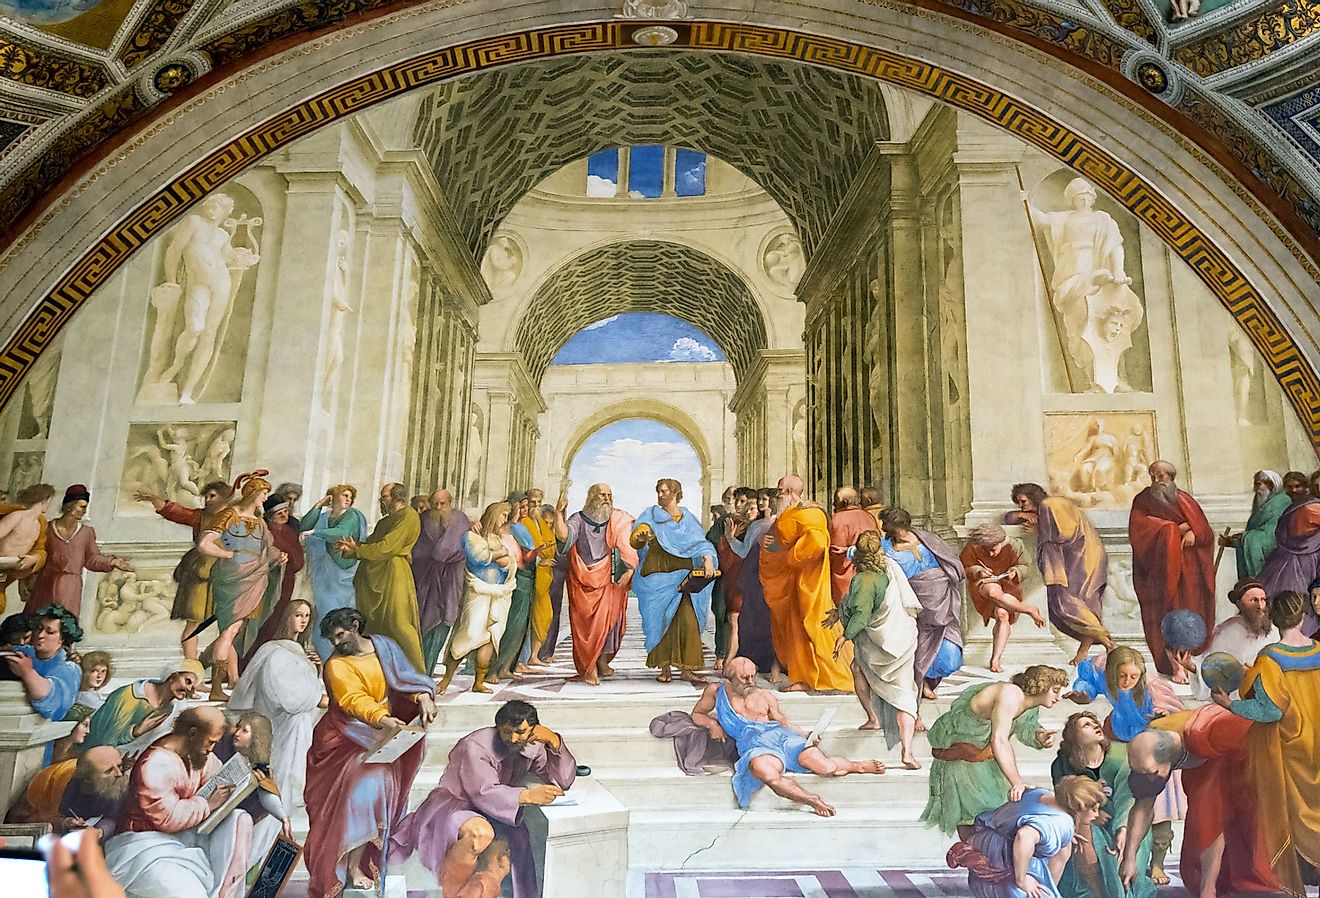 The school of Athens, where many philosophical concepts took shape.